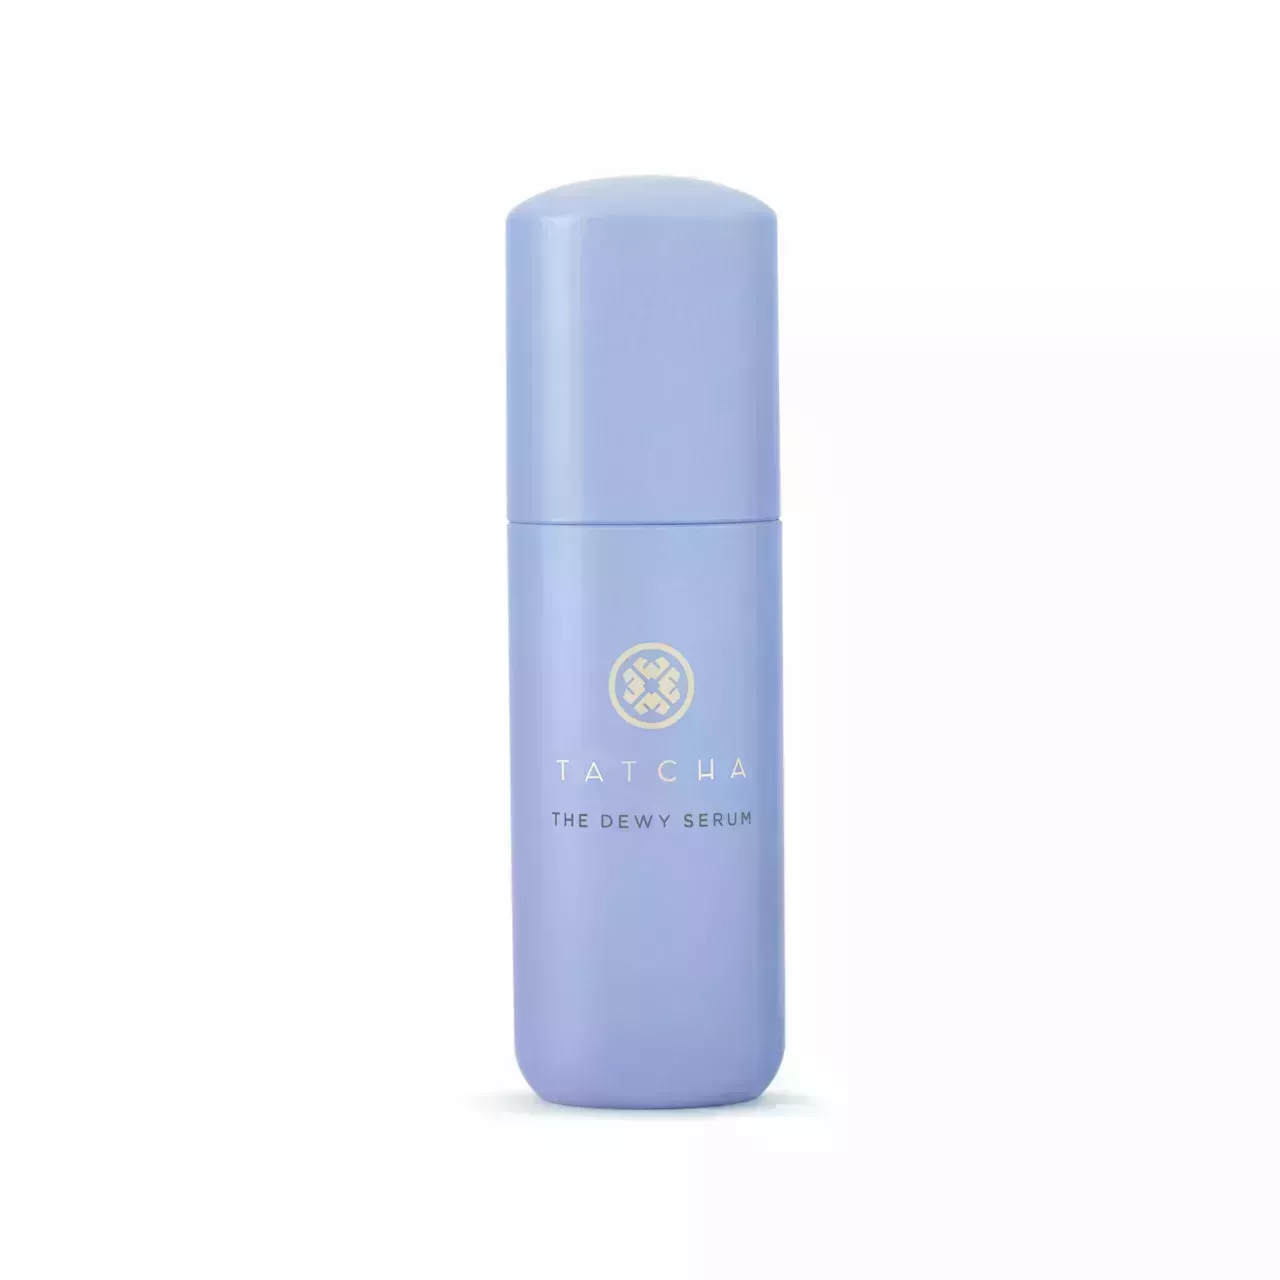 A lavender bottle of Tatcha The Dewy Serum on white background